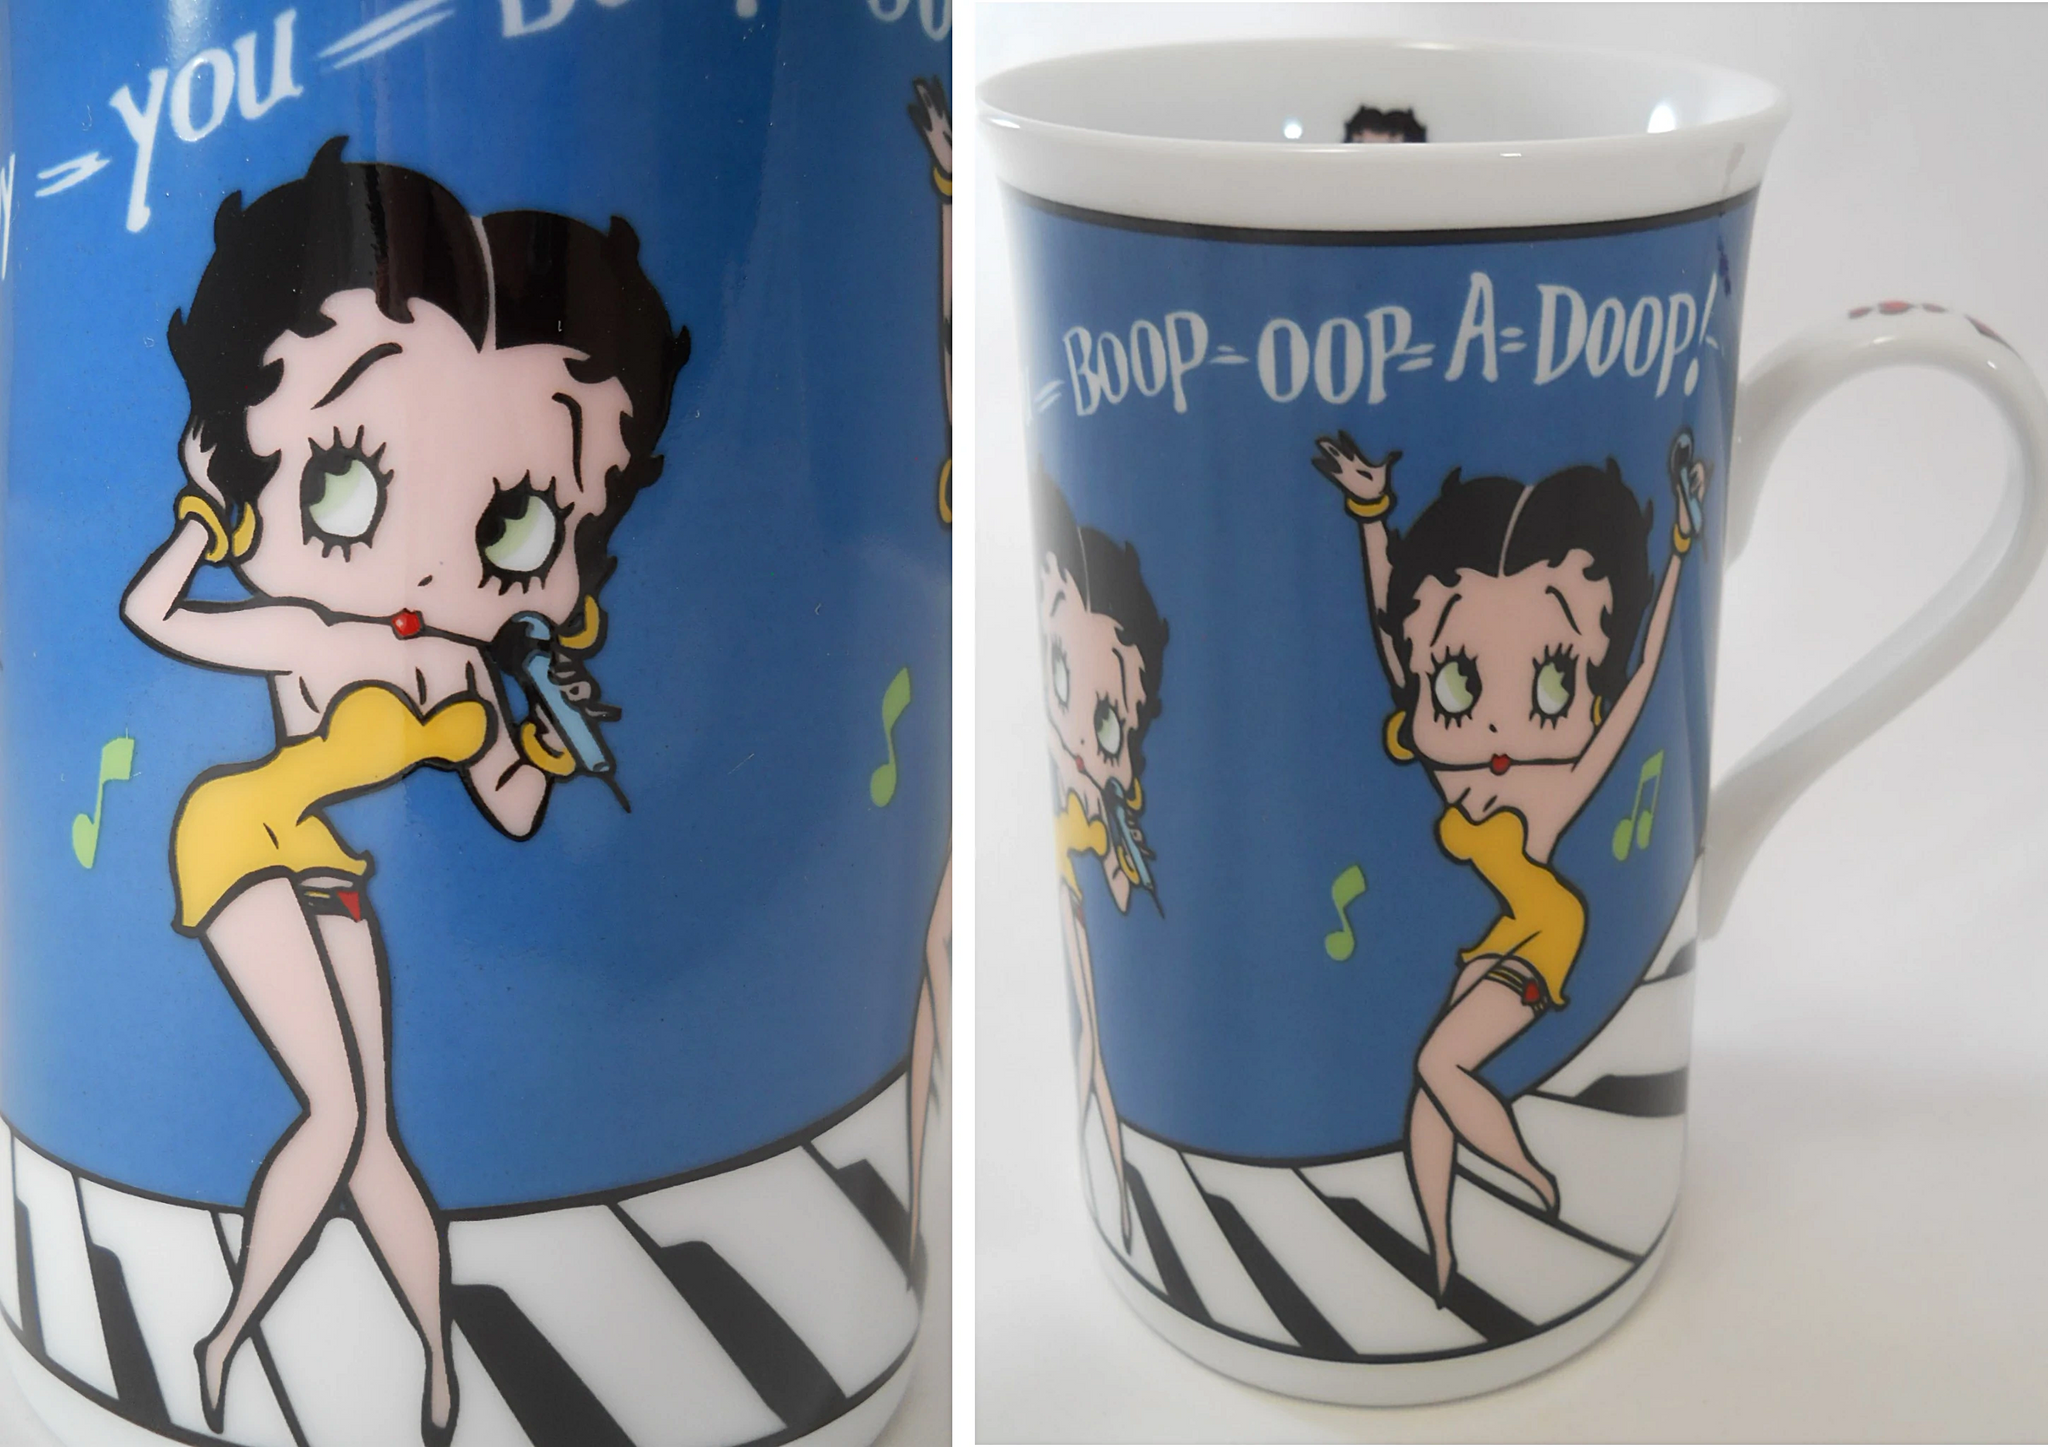 Betty Boop Coffee Cup Set of 4